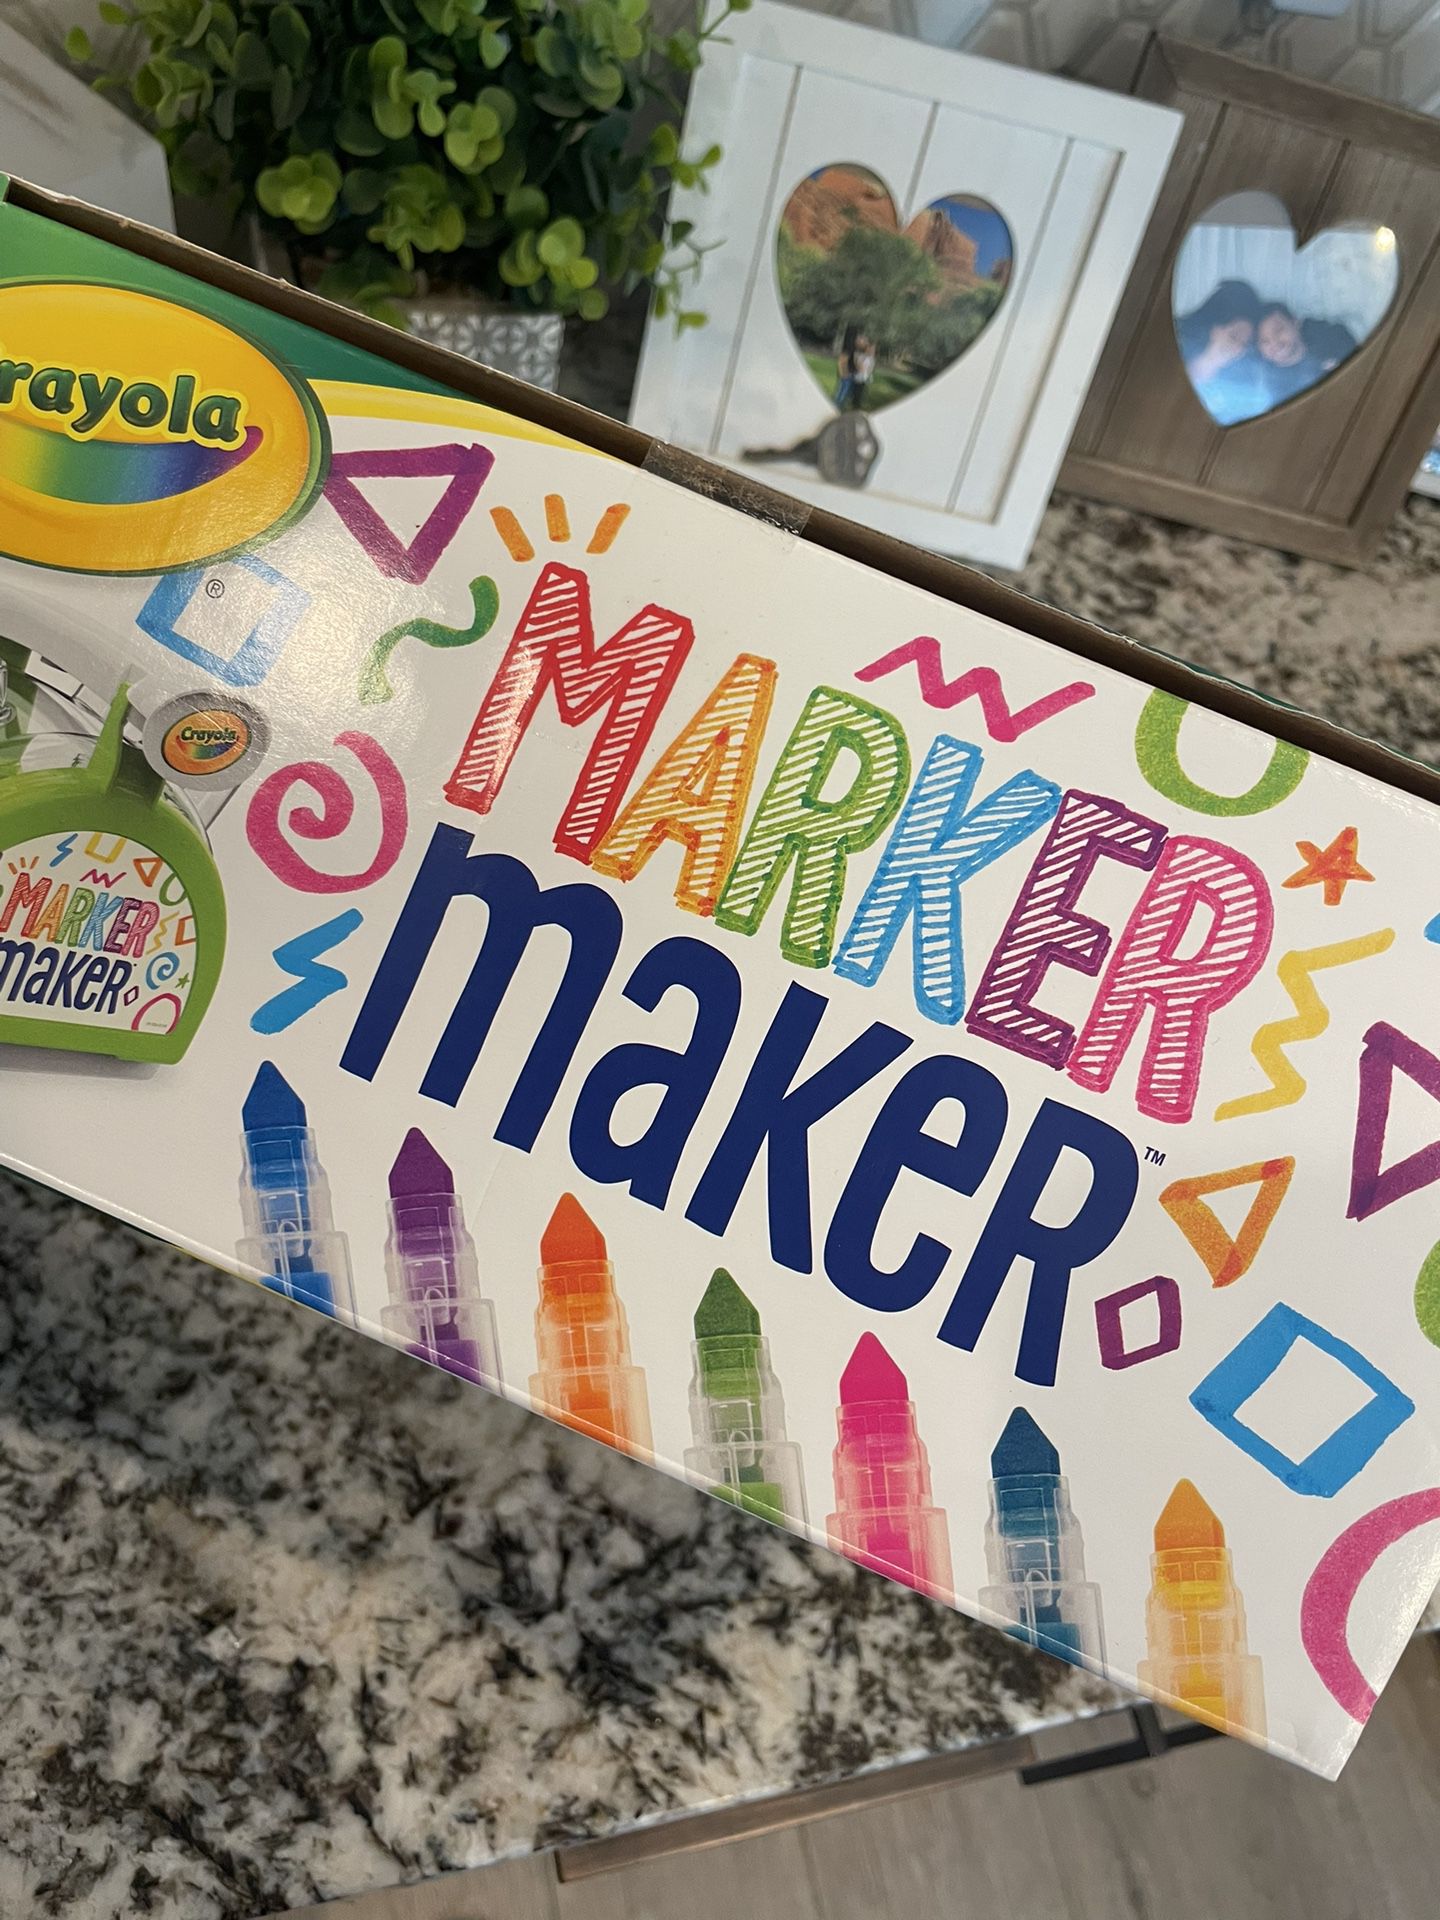 Crayola Silly Scents Marker Maker Kit for Sale in St. Louis, MO - OfferUp